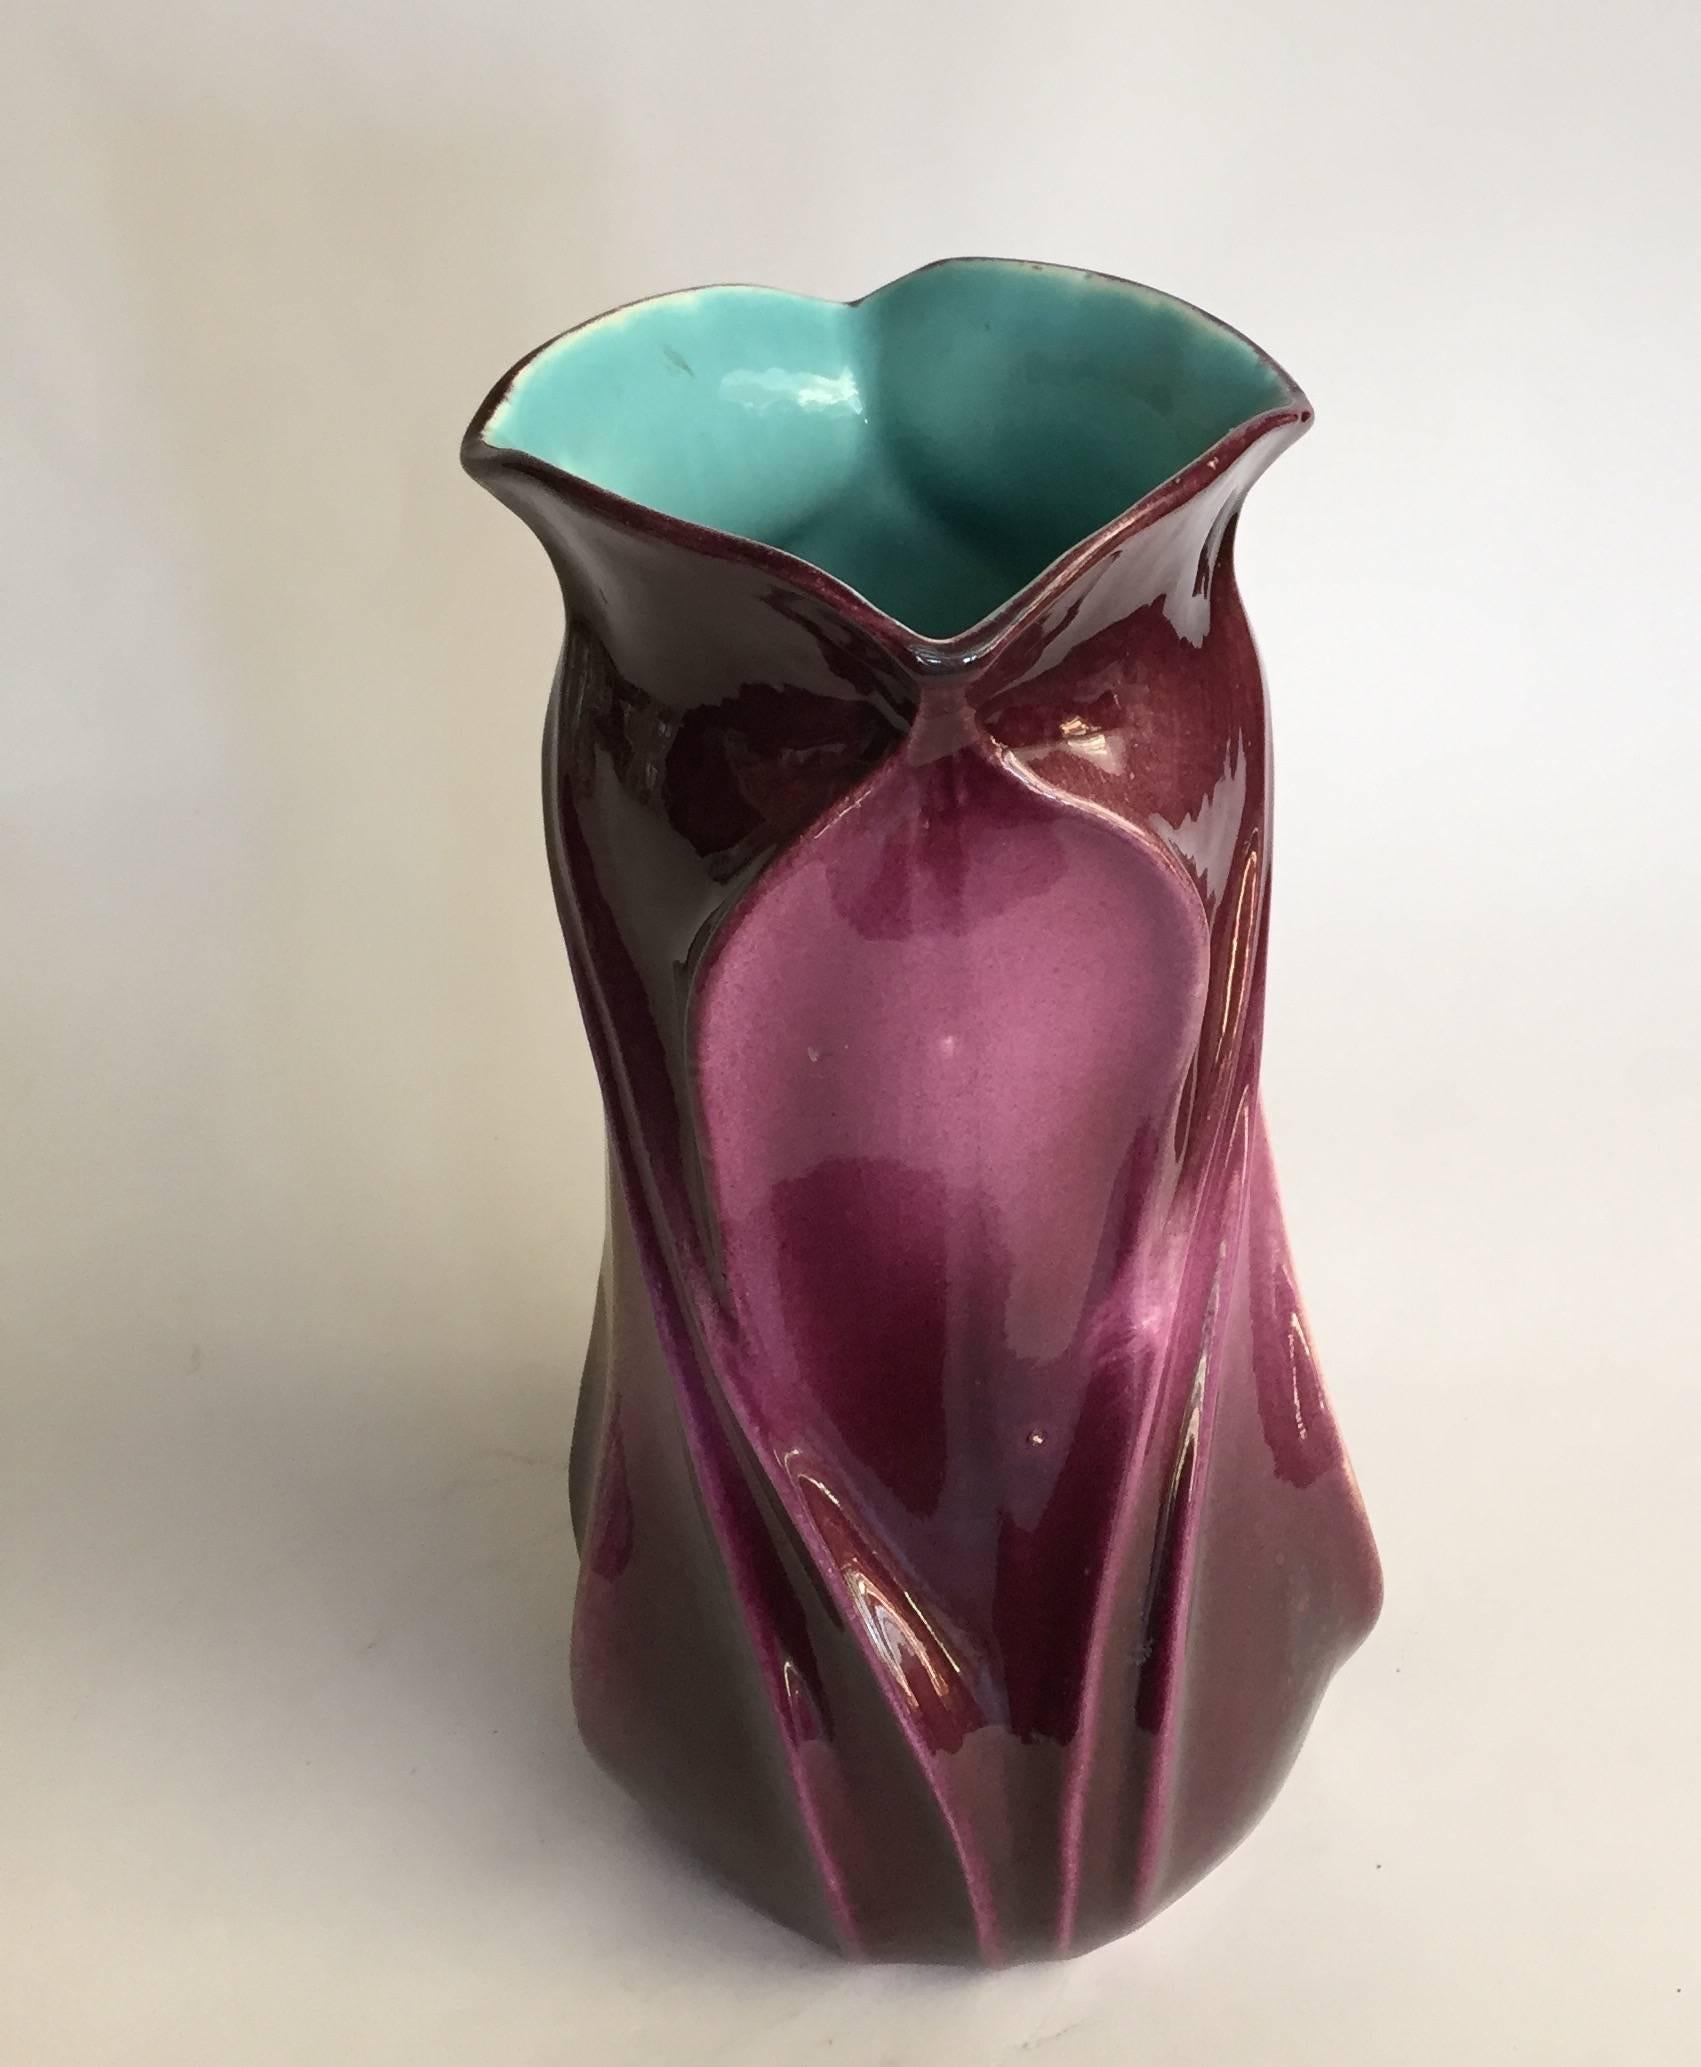 French Sarreguemines faience vase, of Art Nouveau floriform molded form, the undulating and swirling form creating an abstracted flower, enameled with ombre shades of amber to purple- to turquoise. Impressed marks, circa 1915. Measures: 10” H. Minor